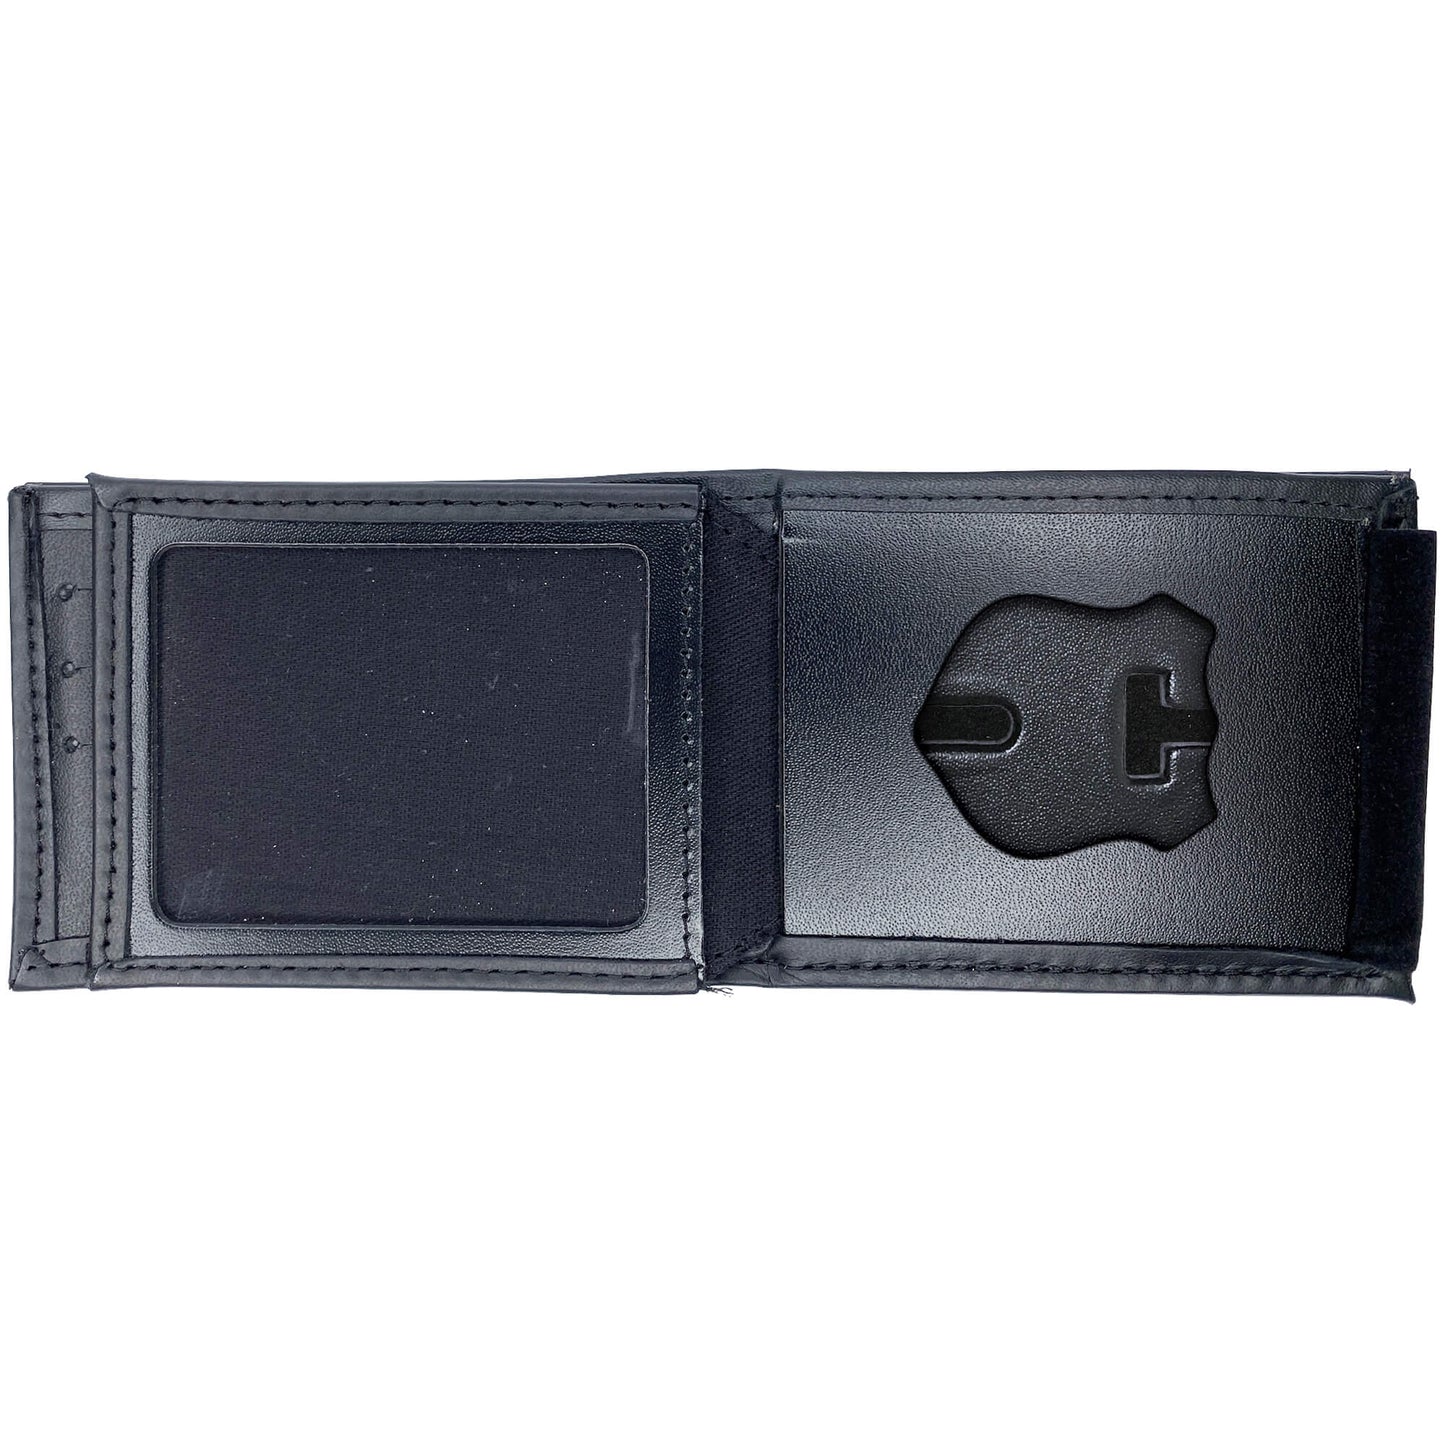 Military Police Officer Hidden Badge Wallet-Perfect Fit-911 Duty Gear Canada